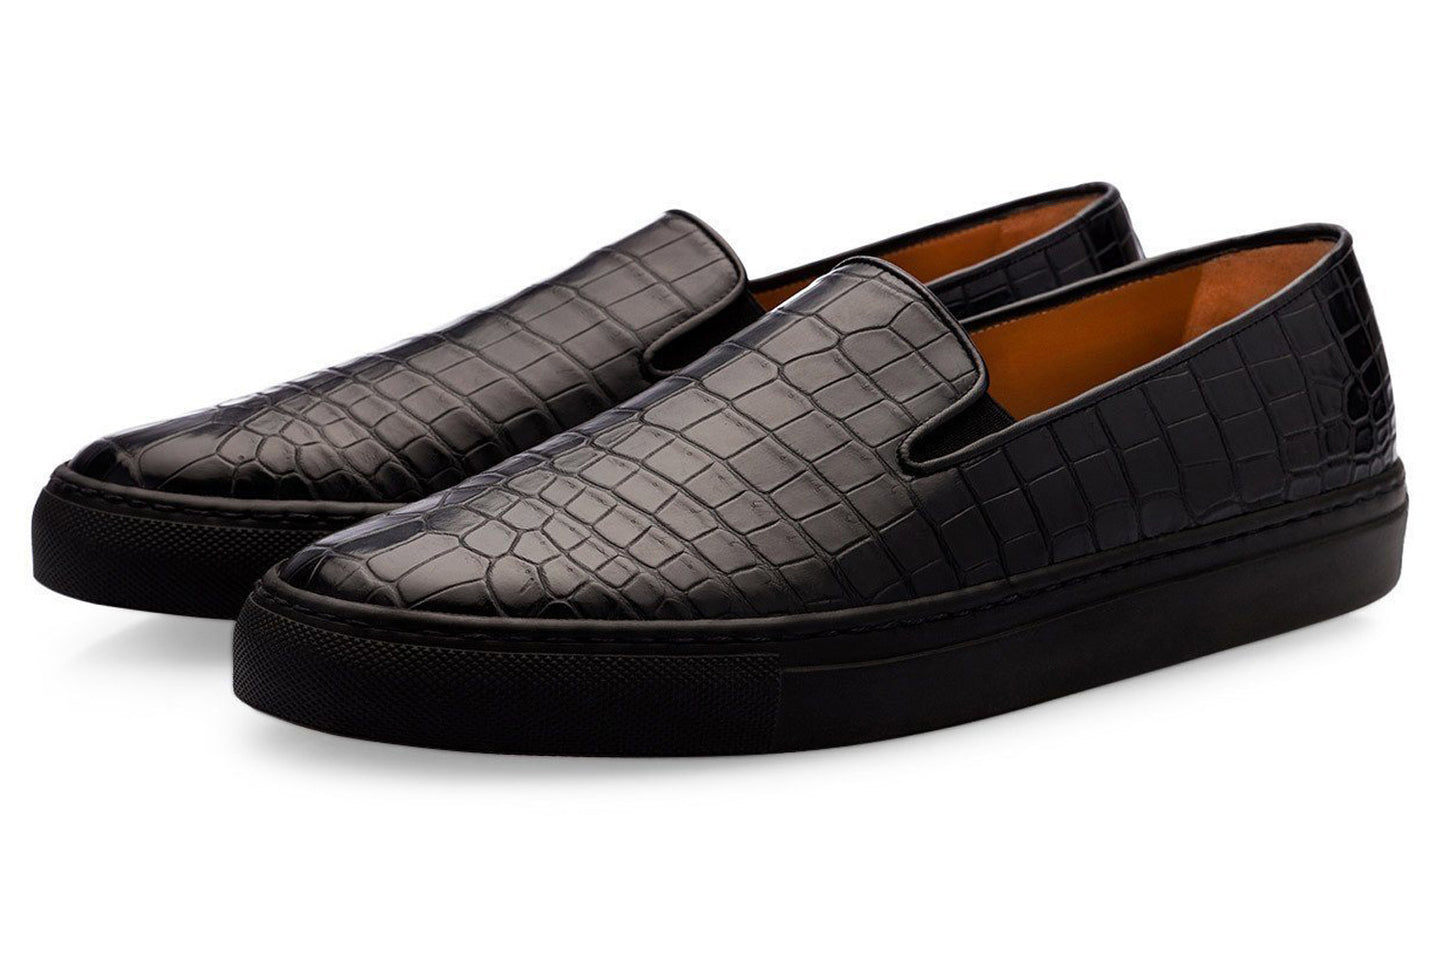 Black Croco Print Leather Slip-on Loafer Sneaker for Men. Black Comfortable Cup Sole.